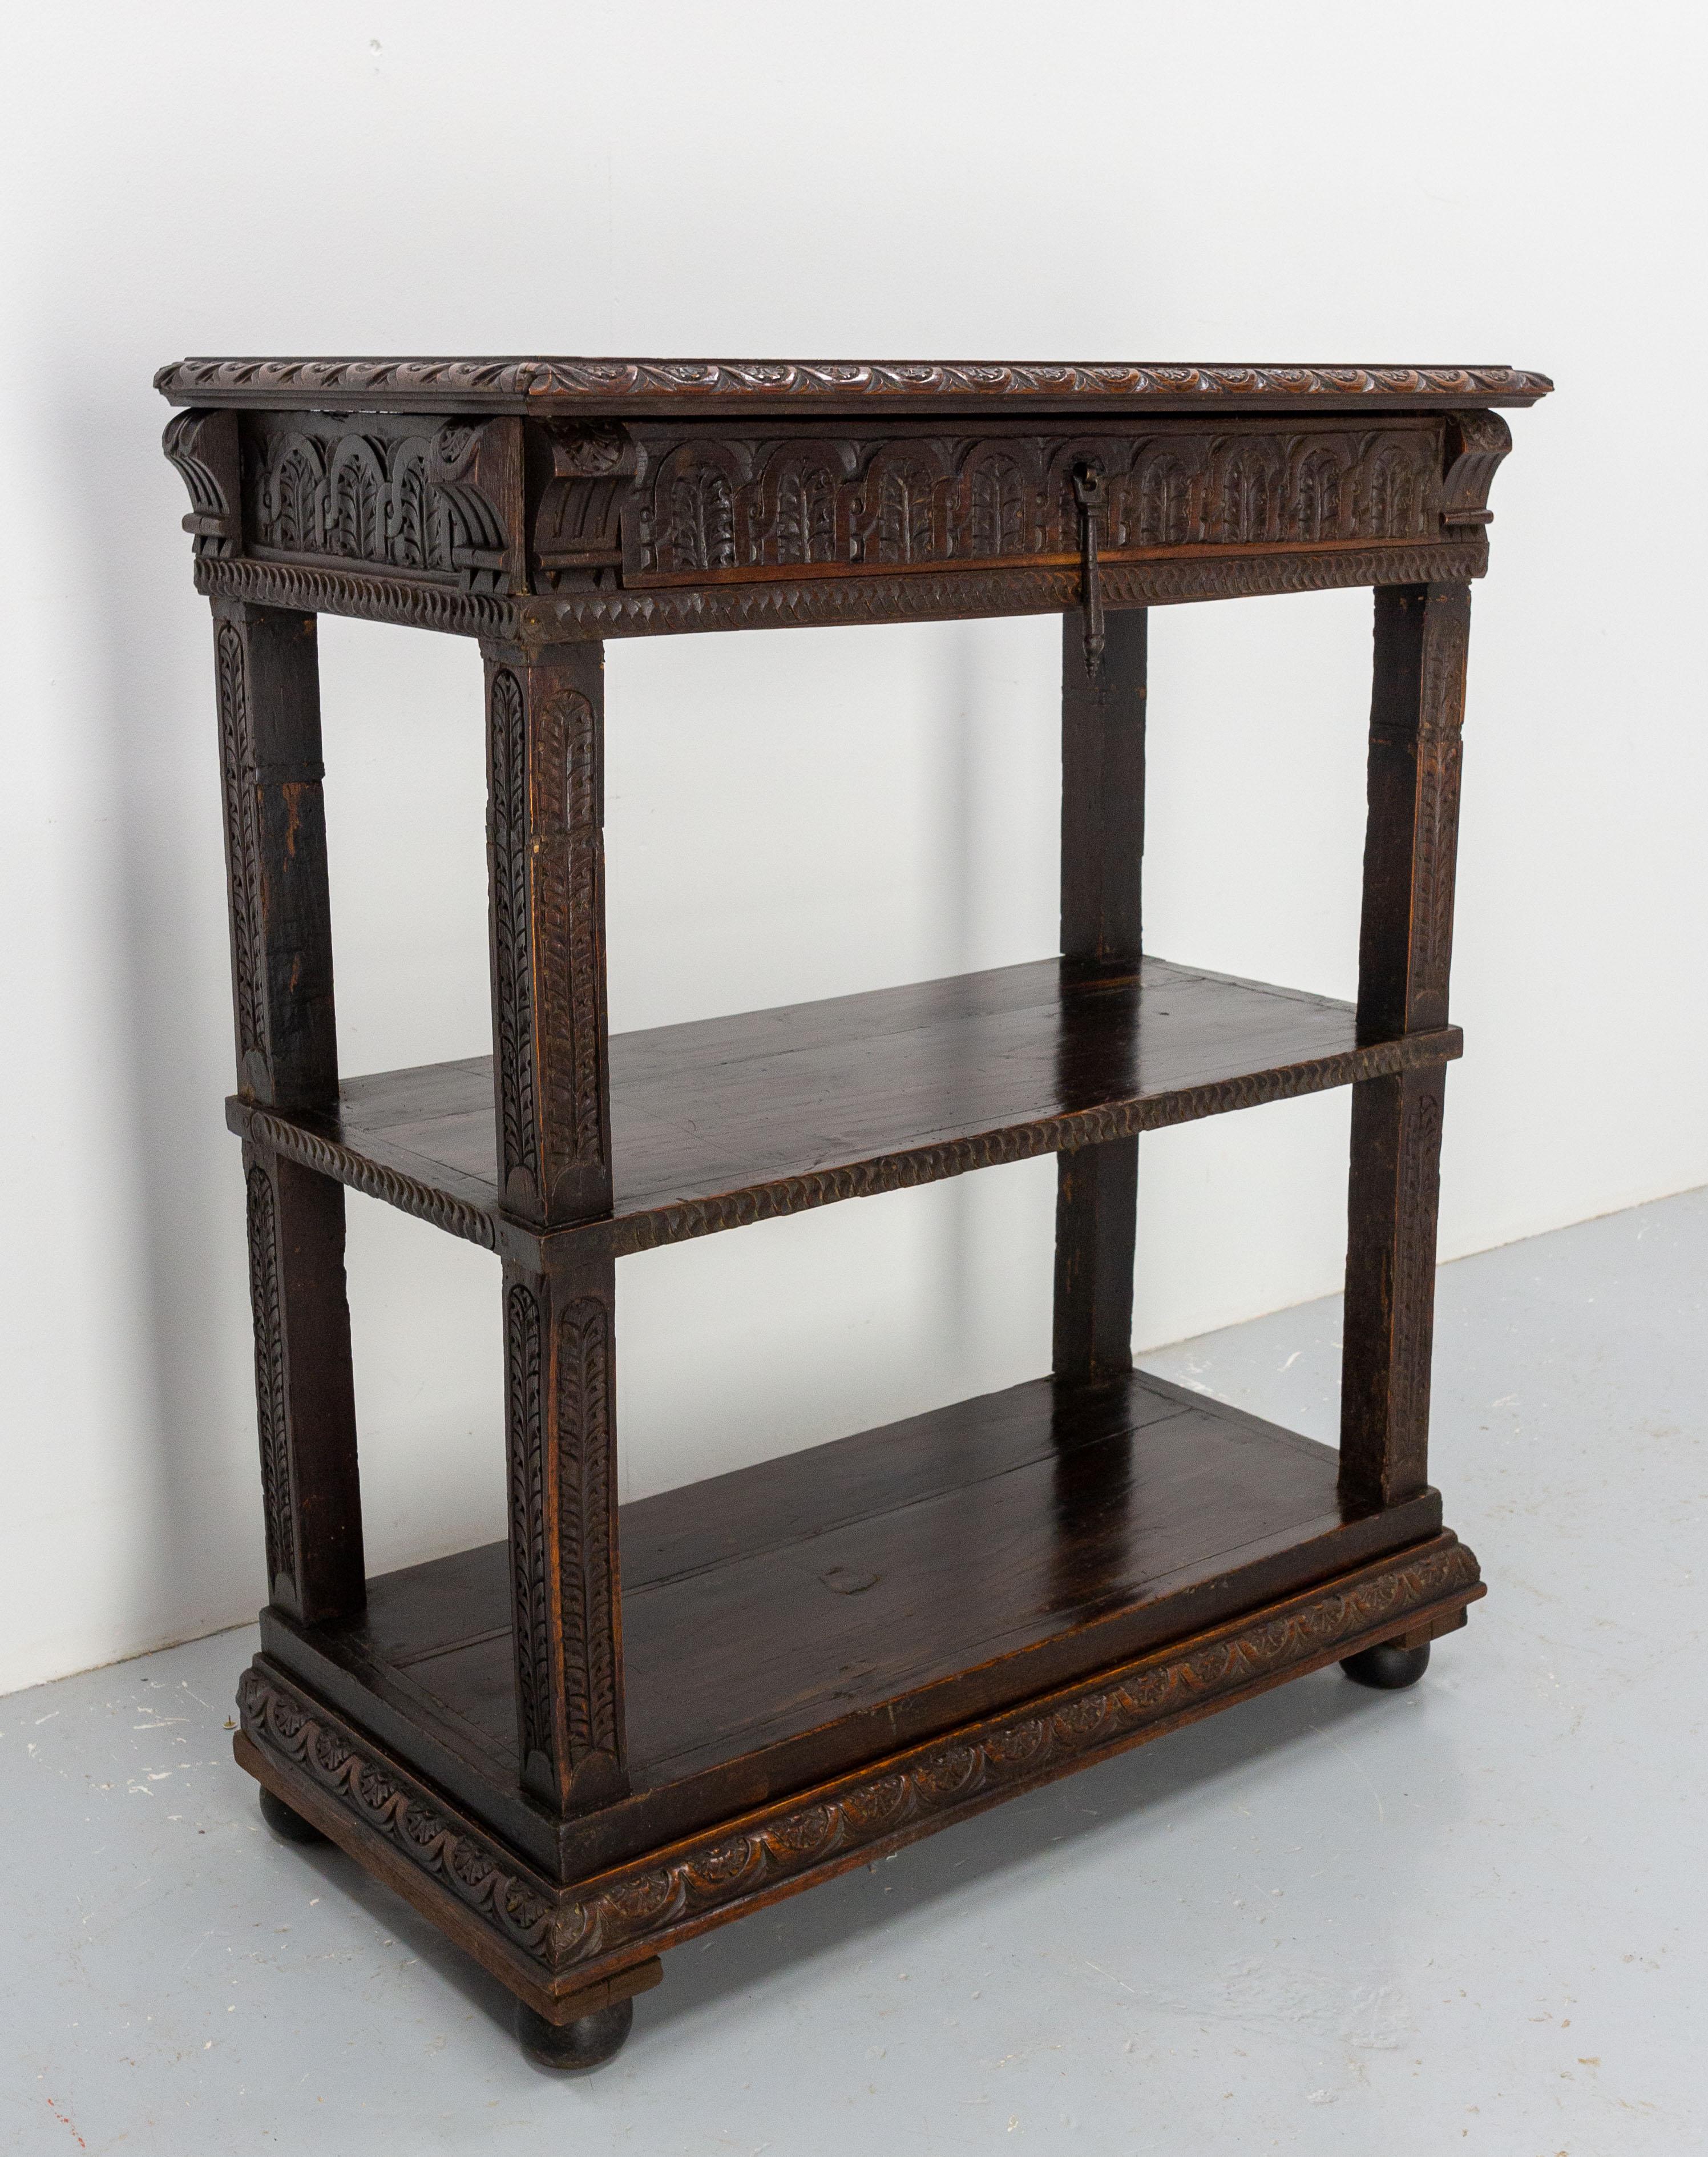 Late 19th Century Side Table Hall or Console Oak Table Spanish Colonial Revival, circa 1890 For Sale